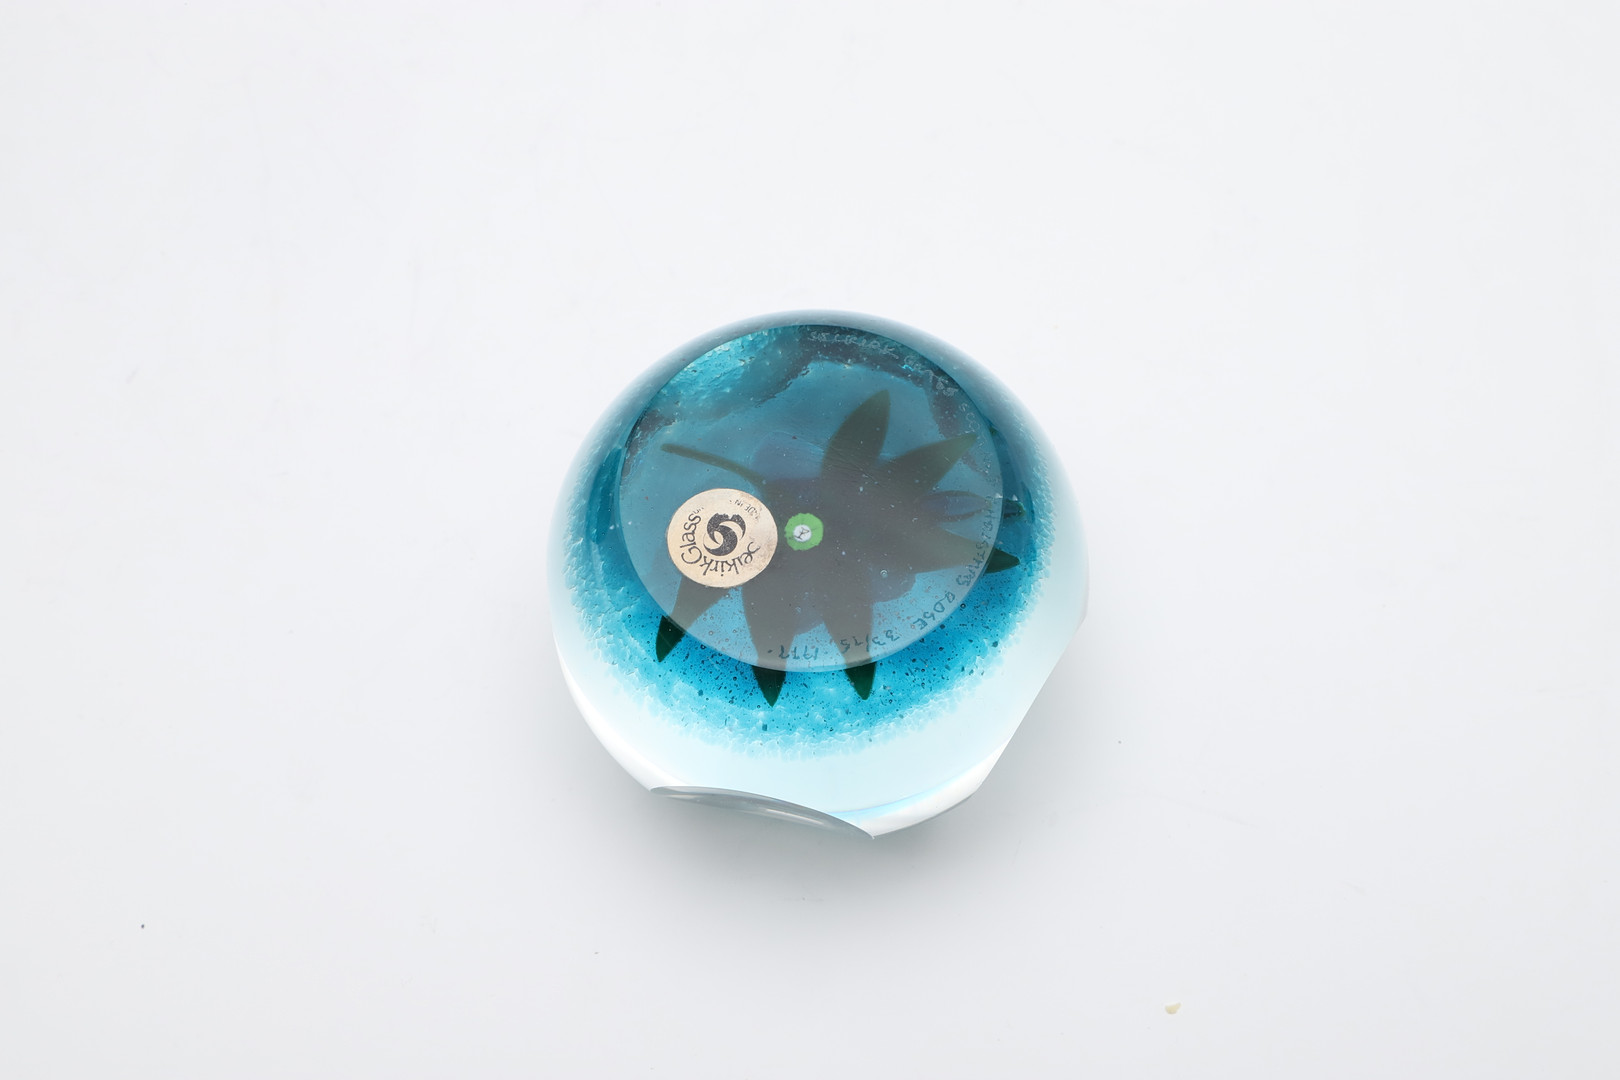 SCOTTISH BORDERS ART GLASS PAPERWEIGHT & SELKIRK PAPERWEIGHTS. - Image 5 of 9